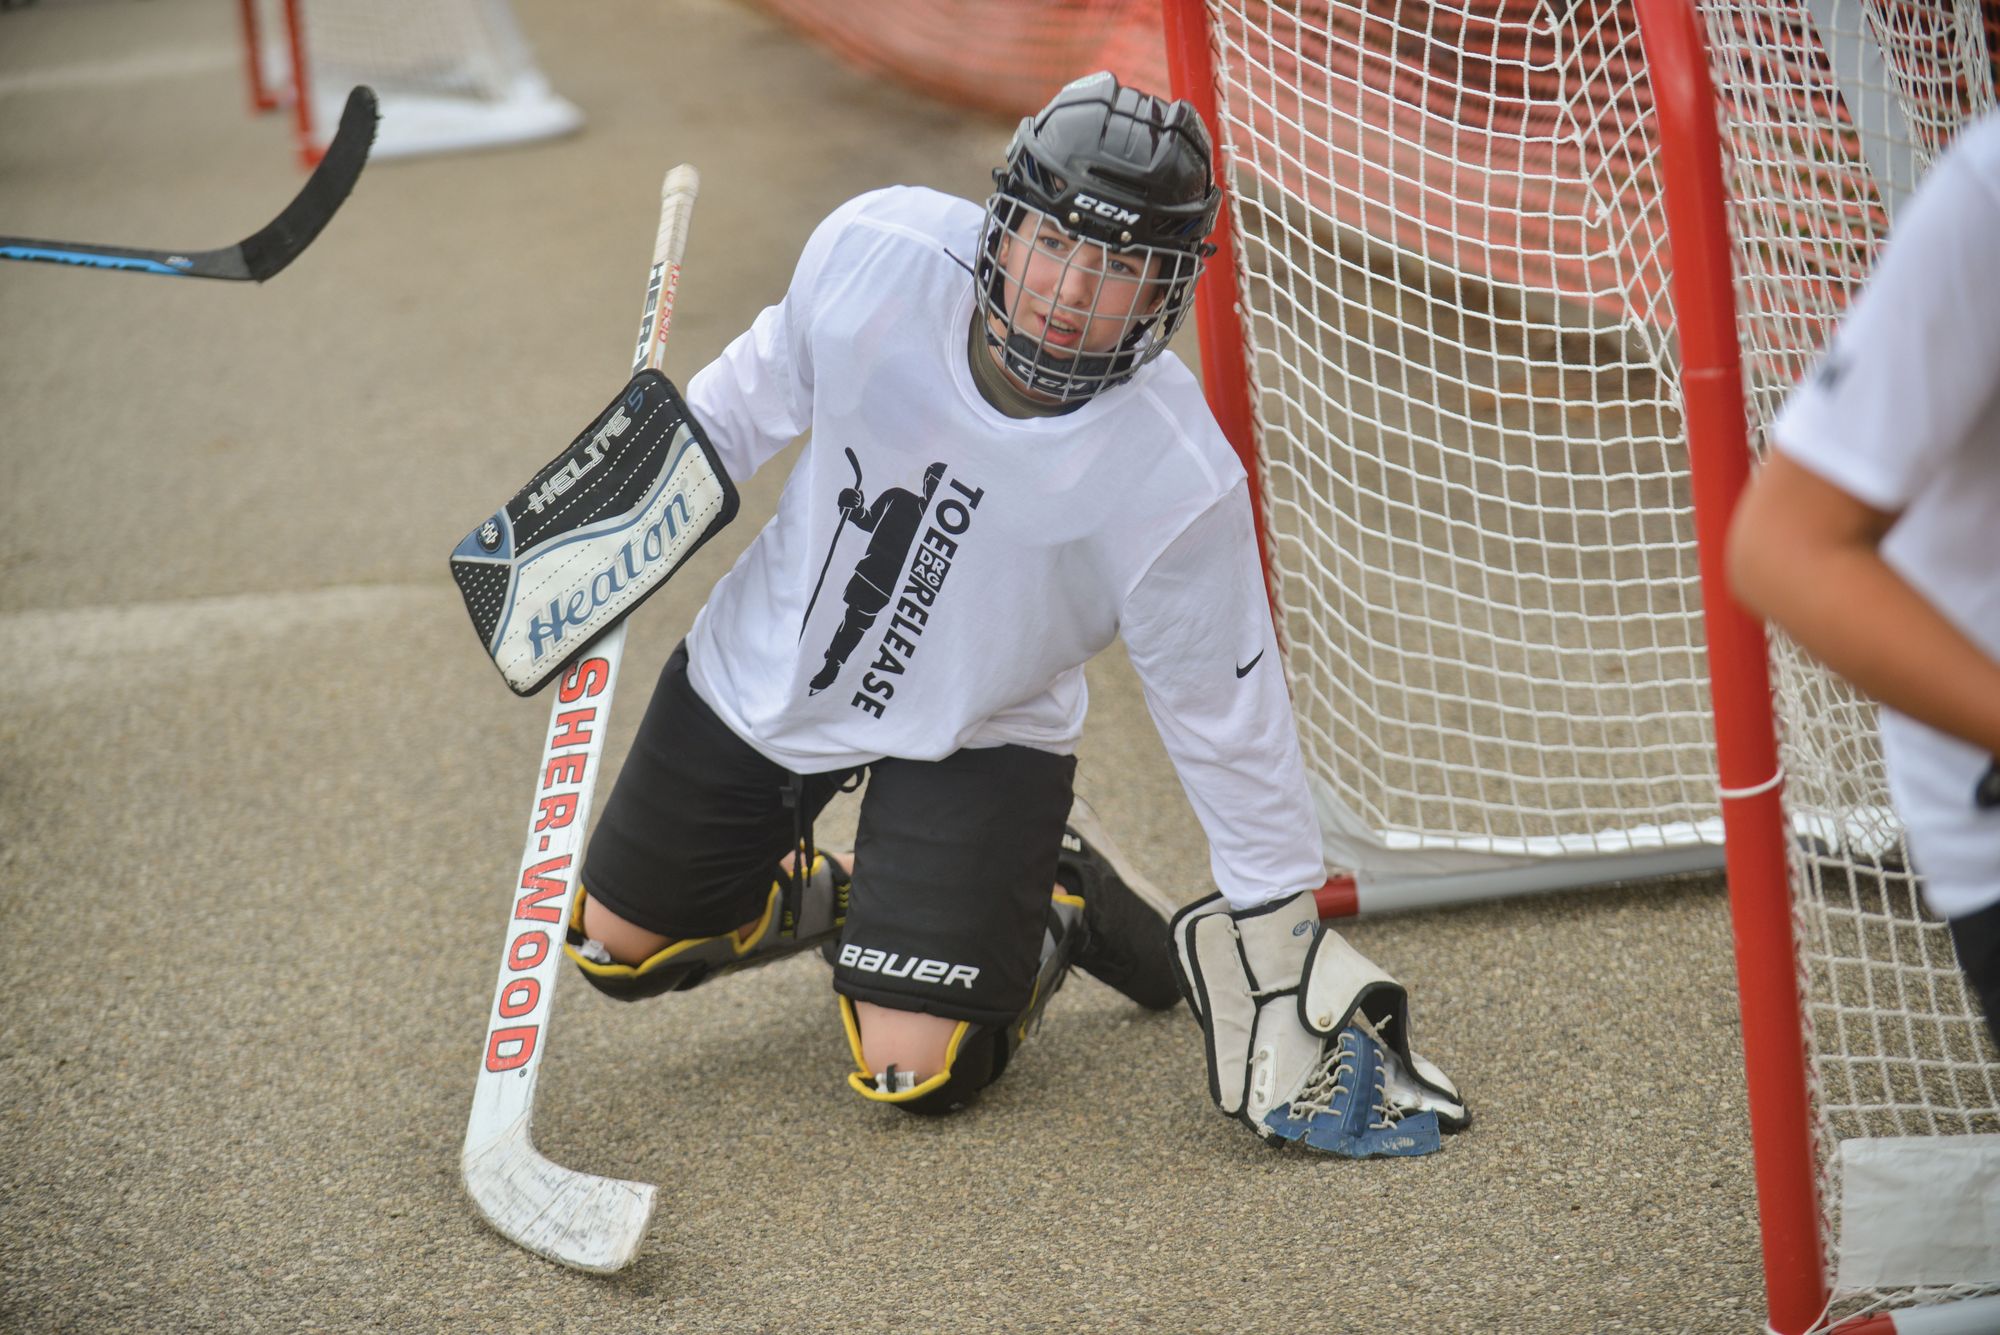 Ball hockey tournament bounces back from pandemic in a big way